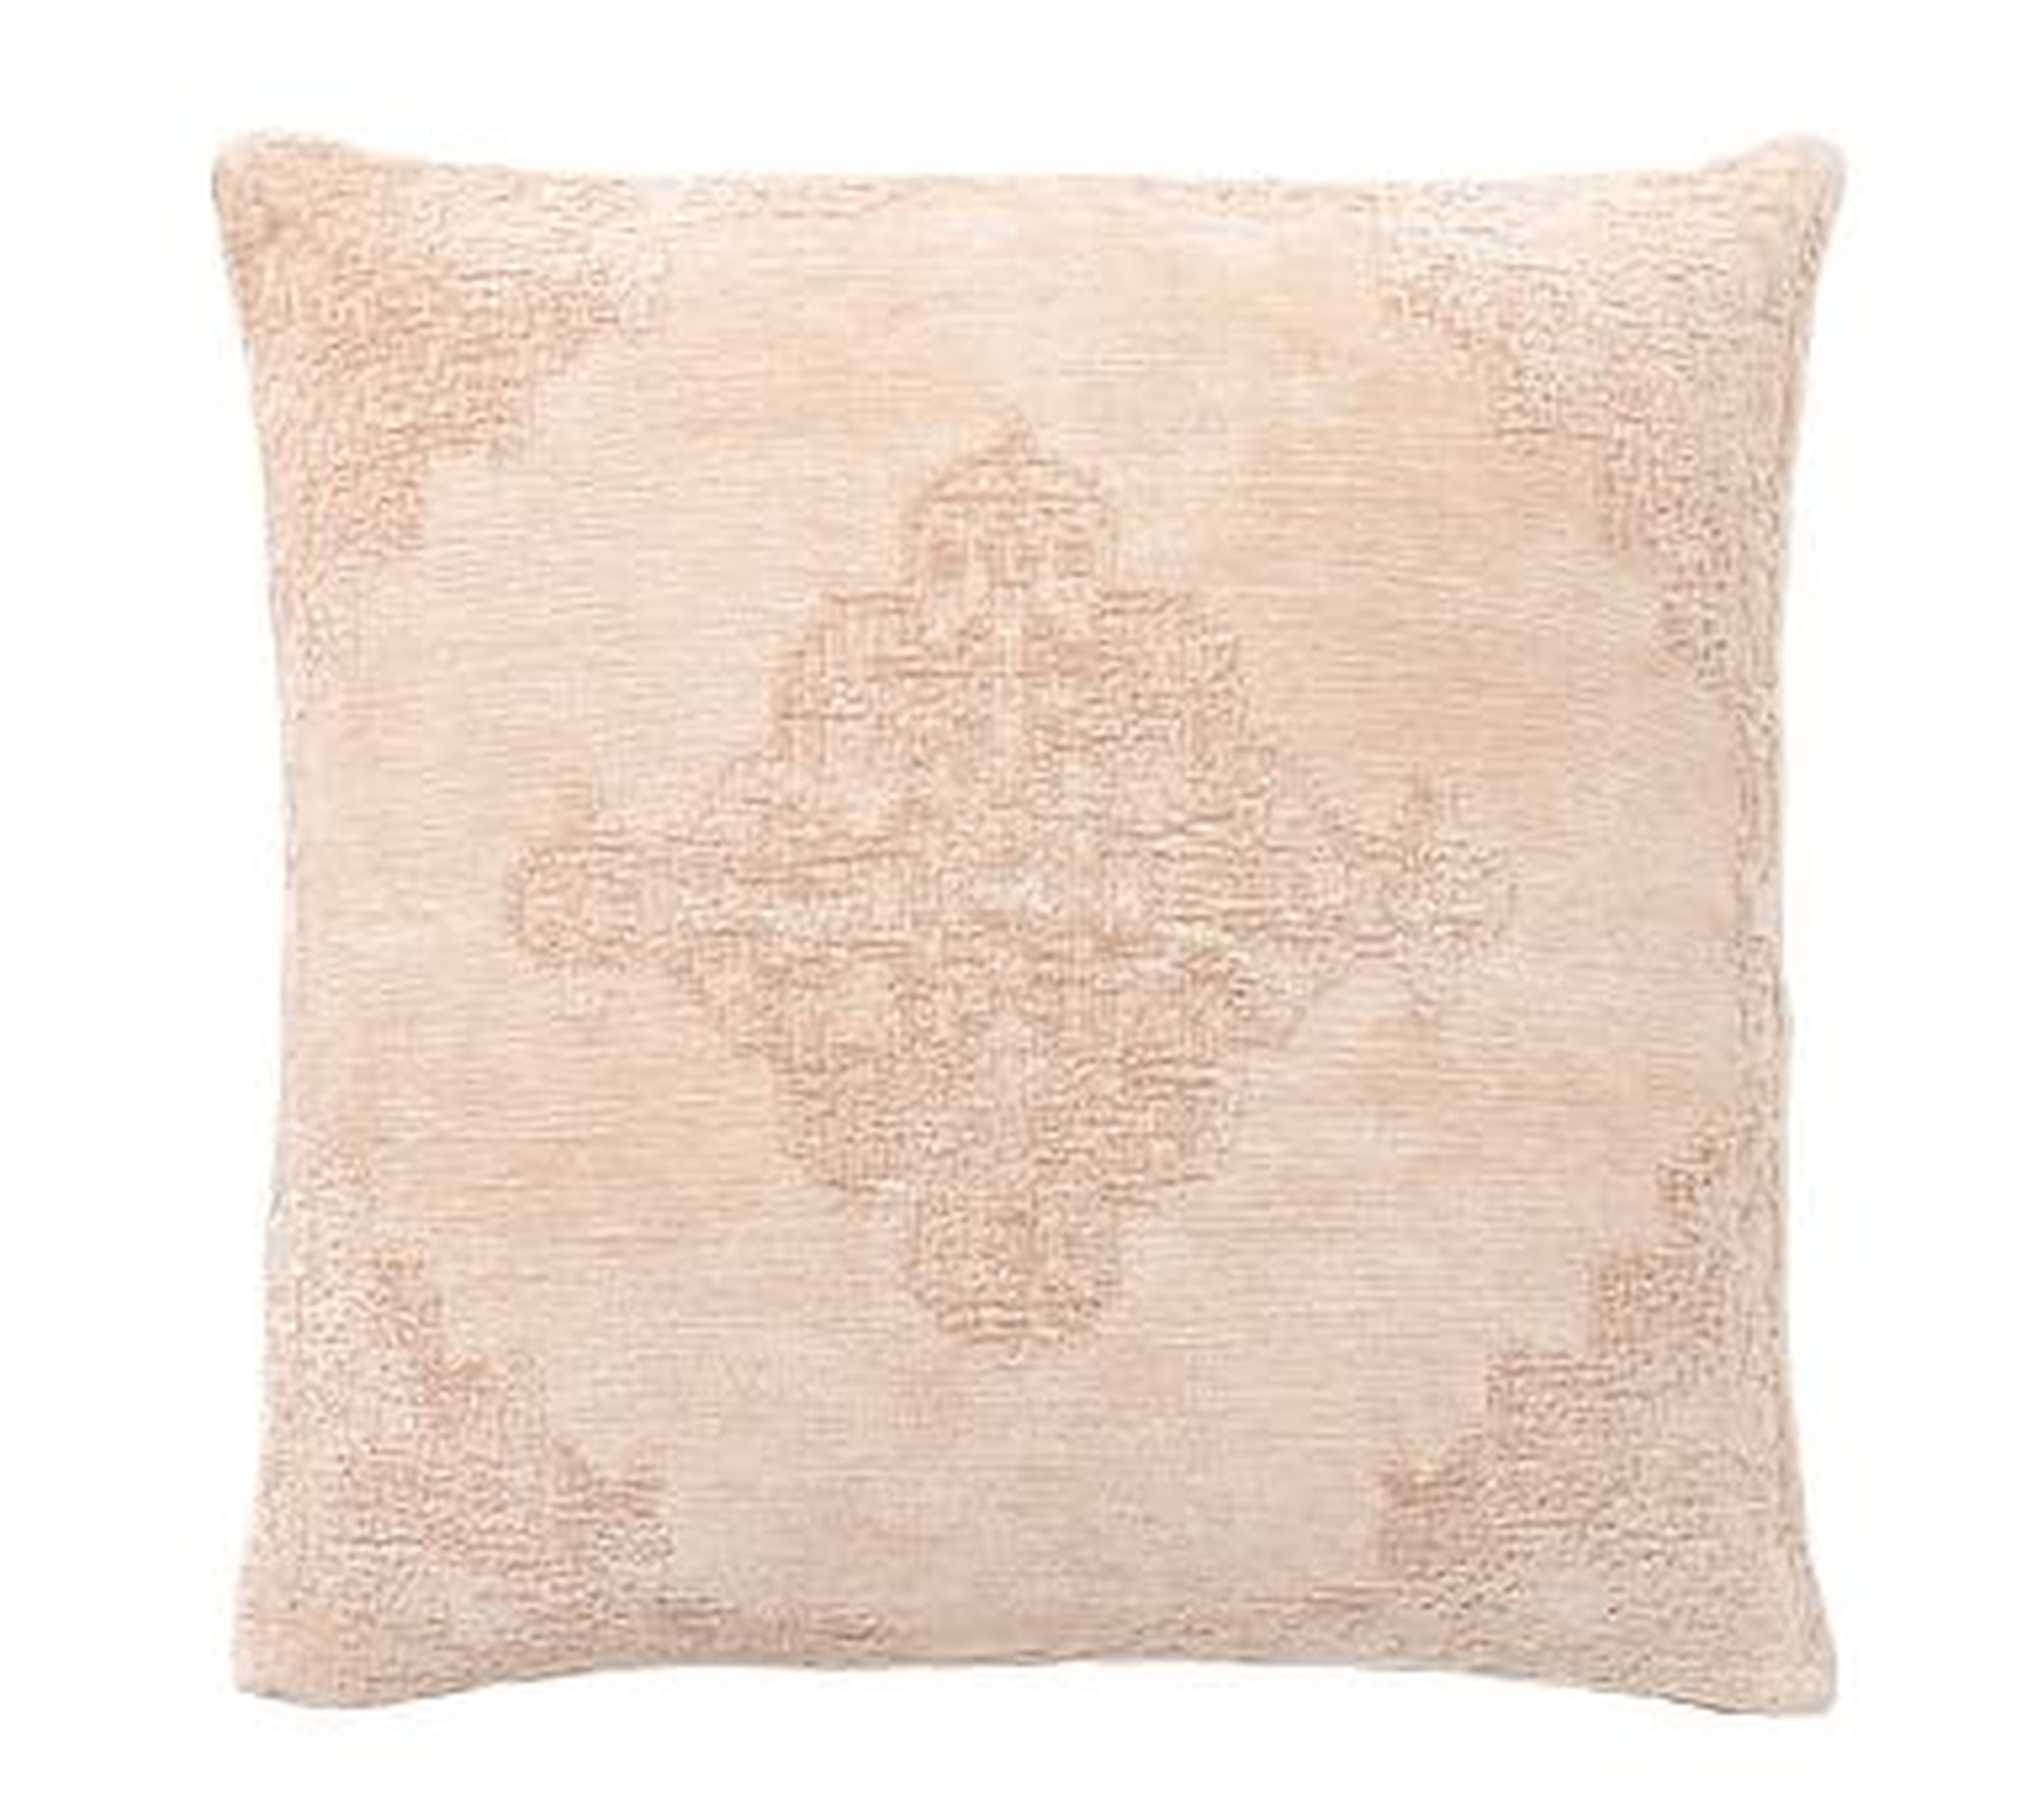 Maddie Textured Pillow Cover, 22", Flax - Pottery Barn